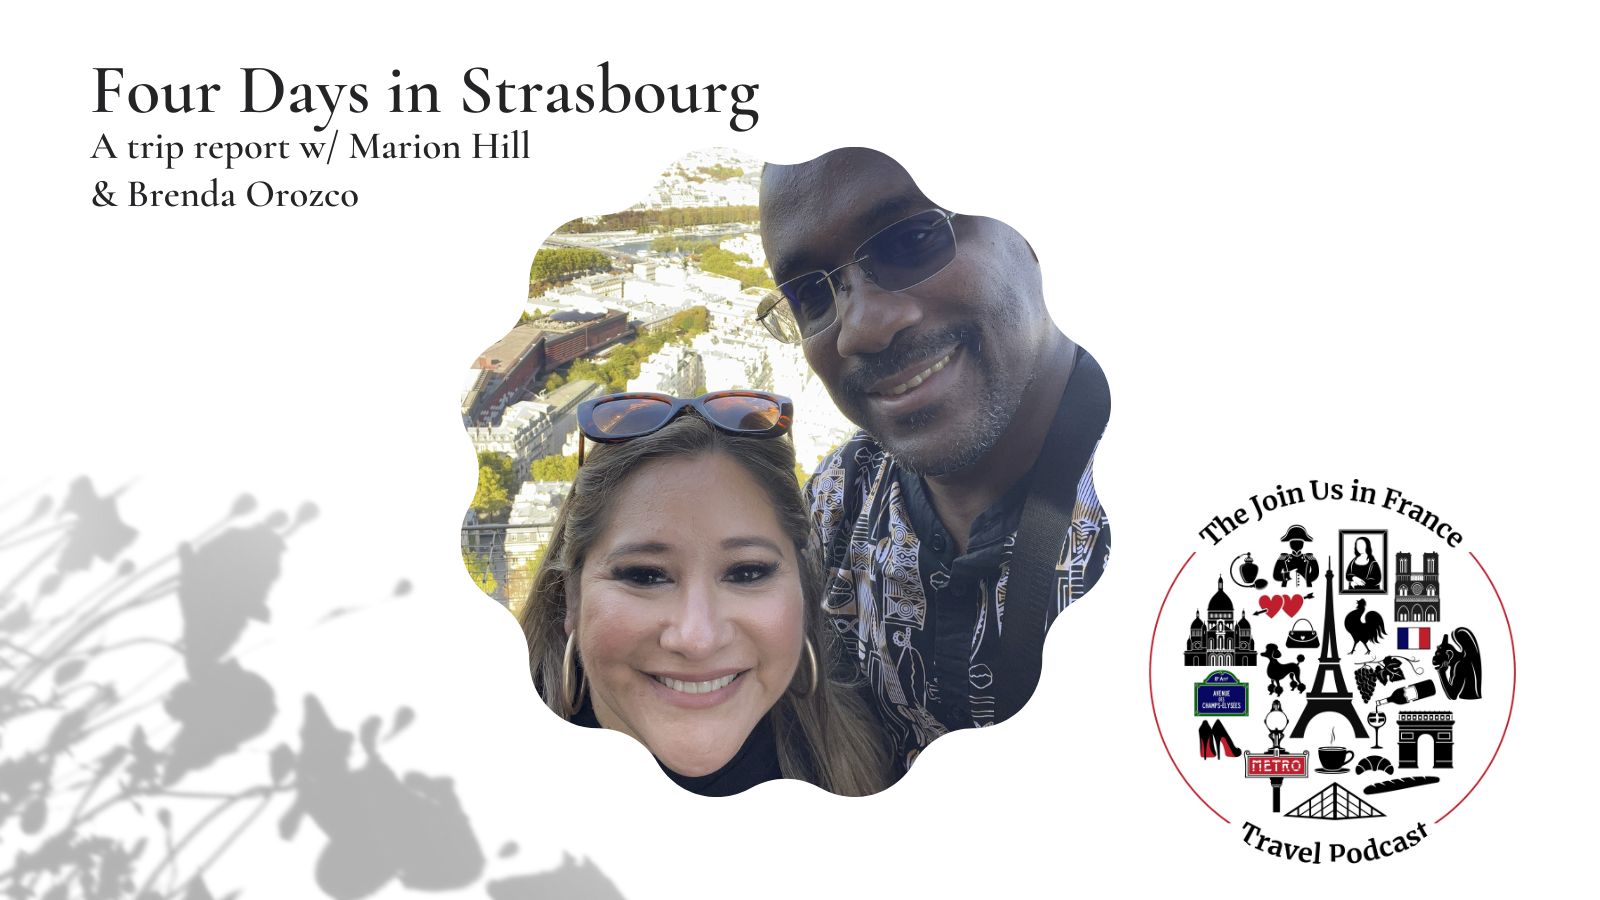 Trip report with Marion and and Brenda: four days in Strasbourg episode